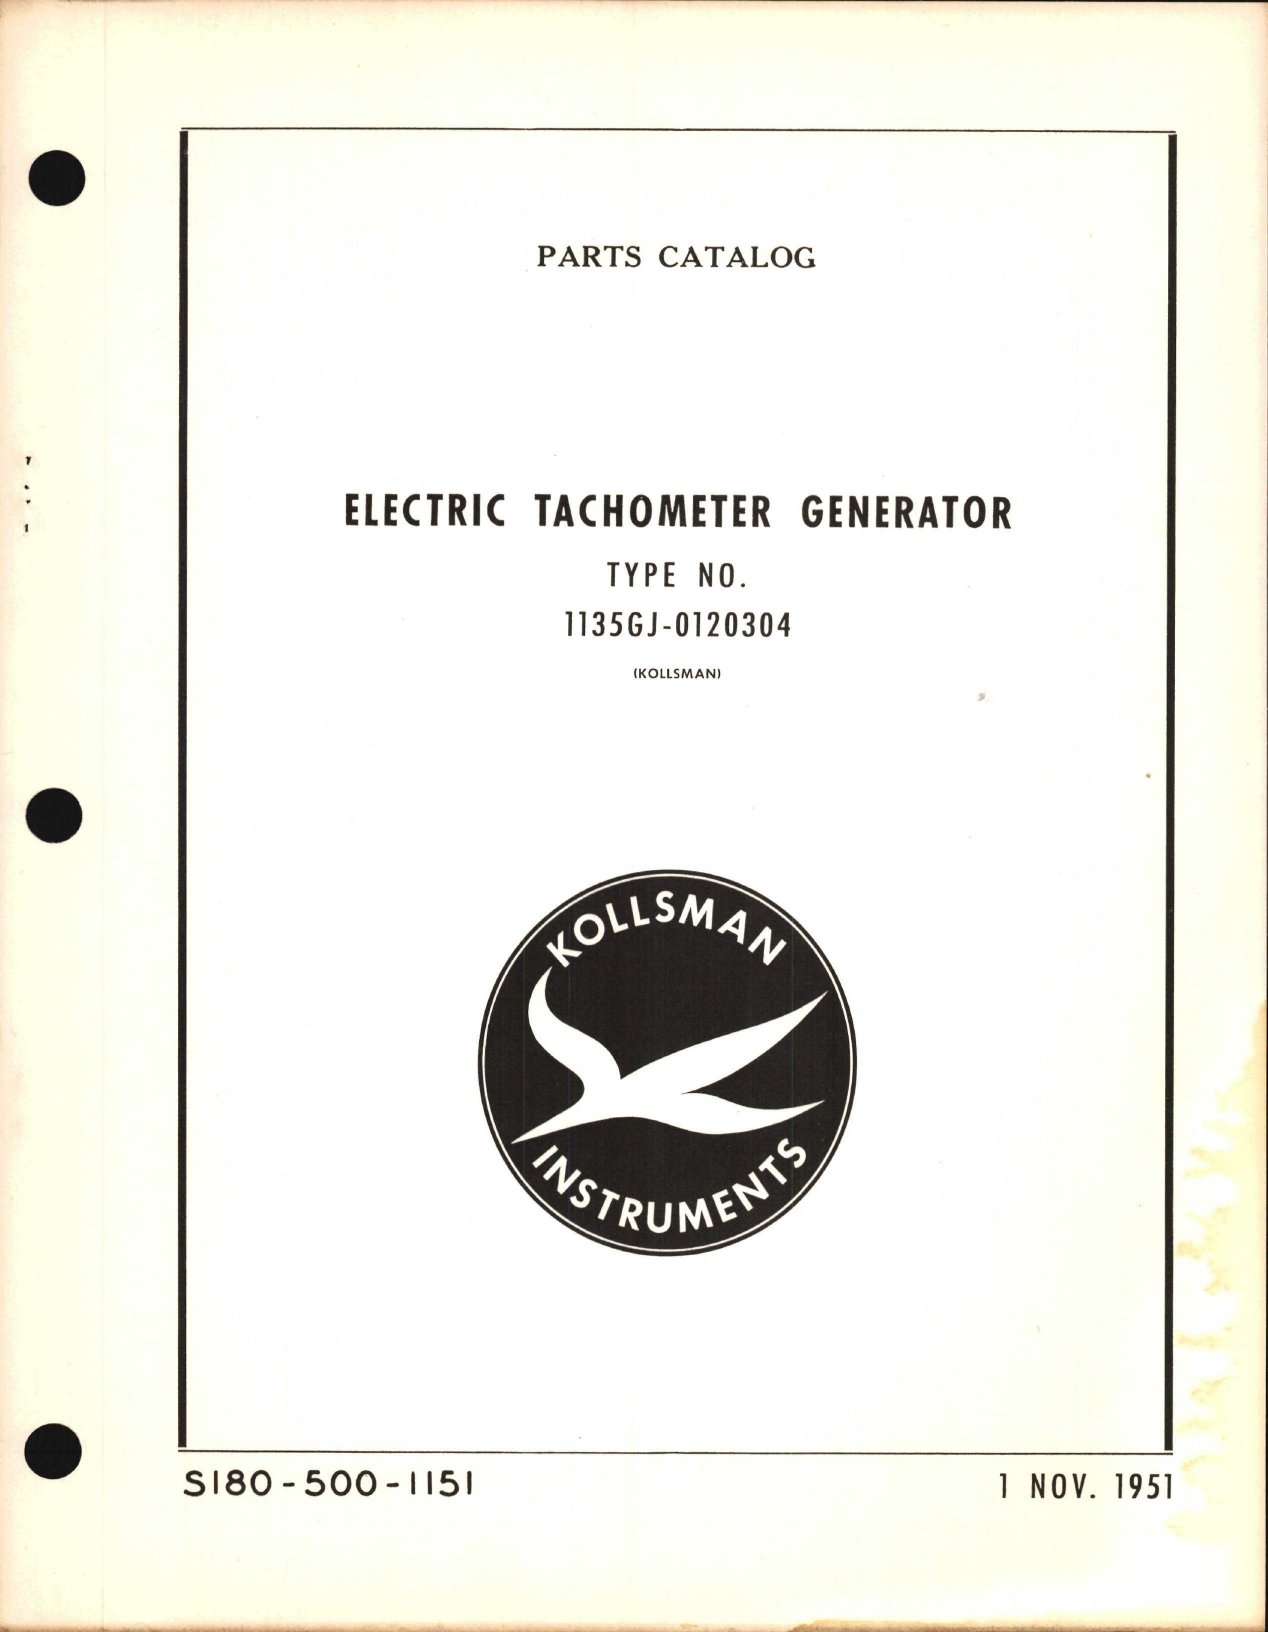 Sample page 1 from AirCorps Library document: Parts Catalog for Kollsman Electric Tachometer Generator